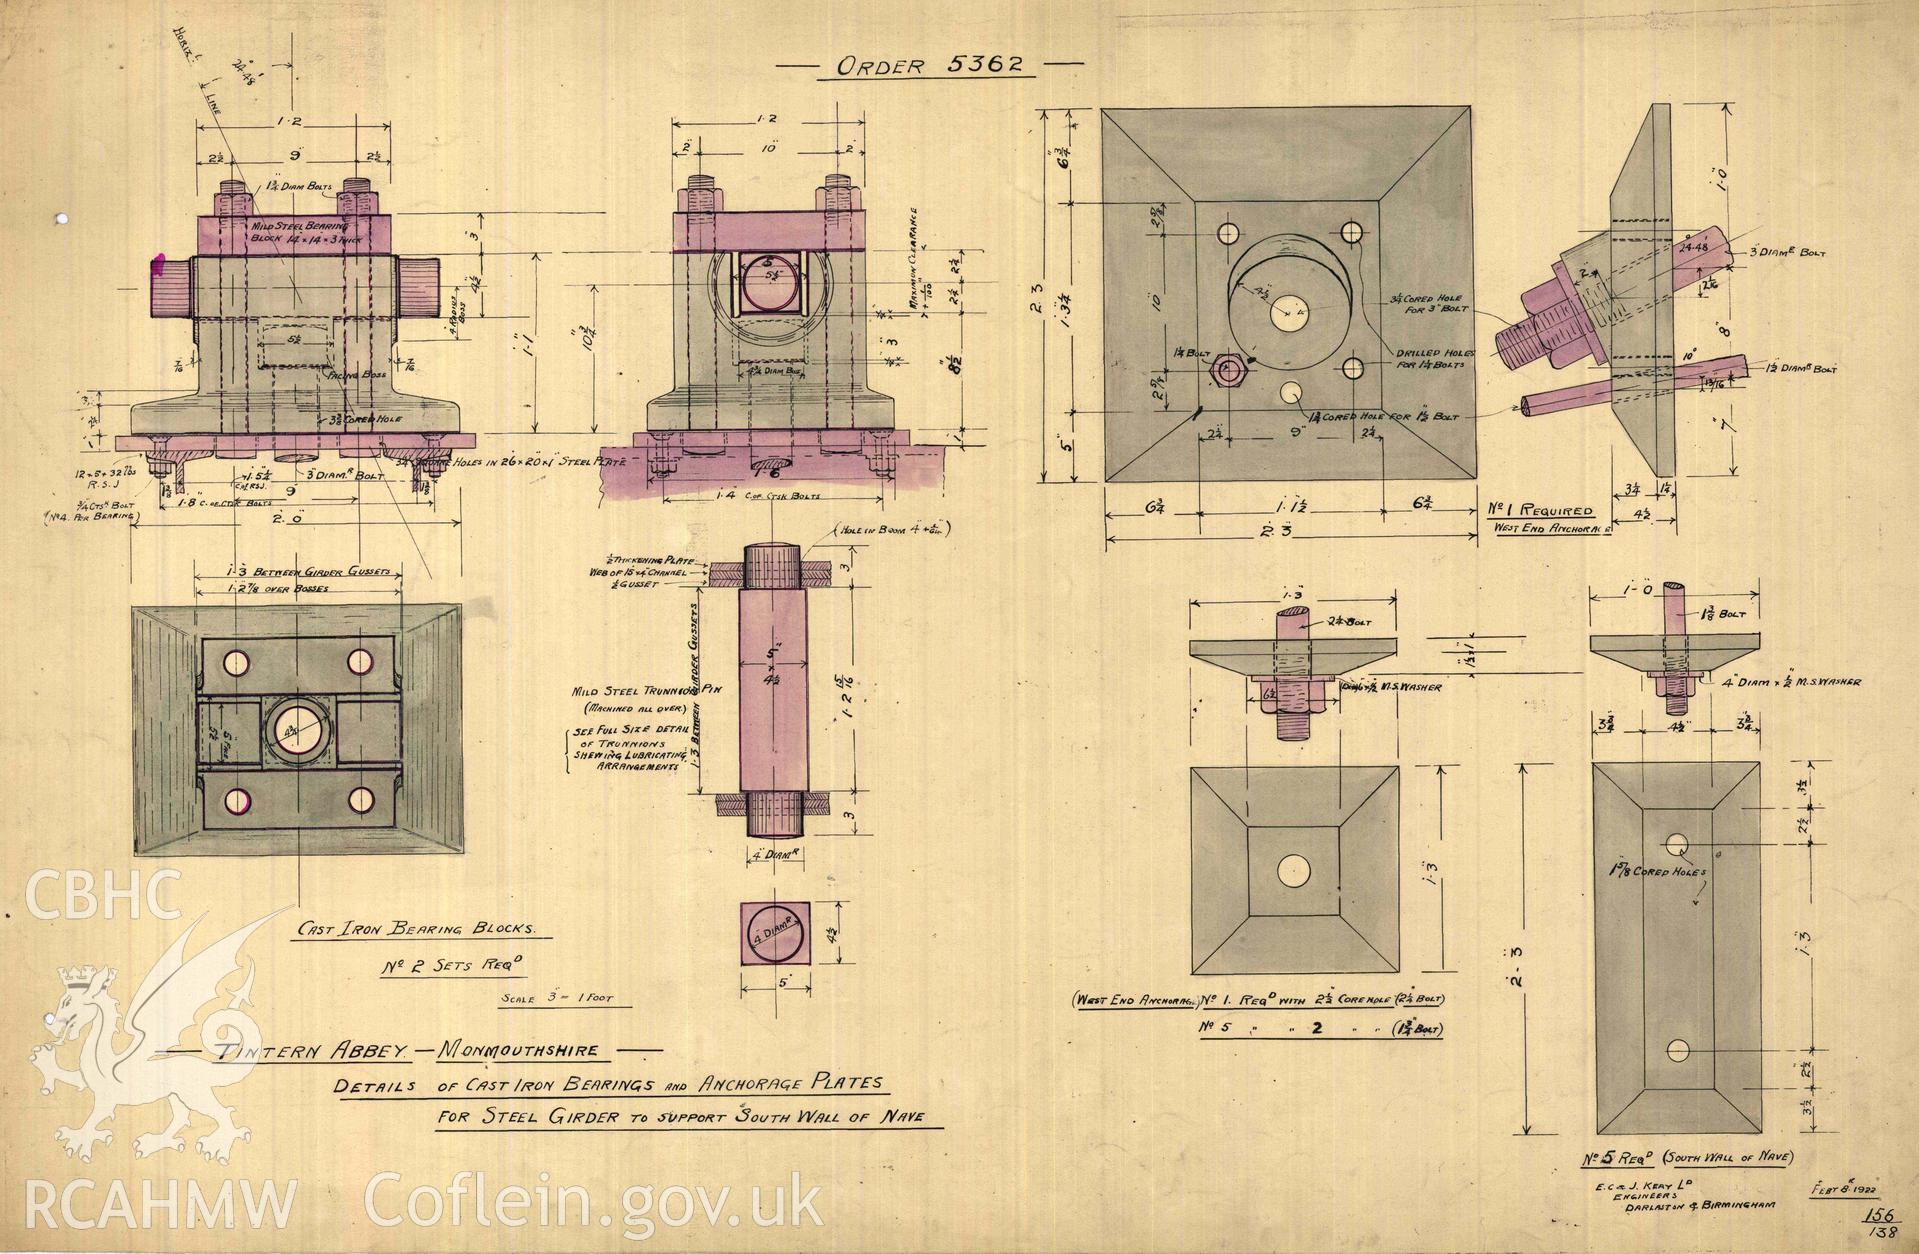 Cadw guardianship monument drawing of Tintern Abbey. Details Cast Iron Bearings + Anchor Plates. Cadw ref. No. 156/138. Various scales.